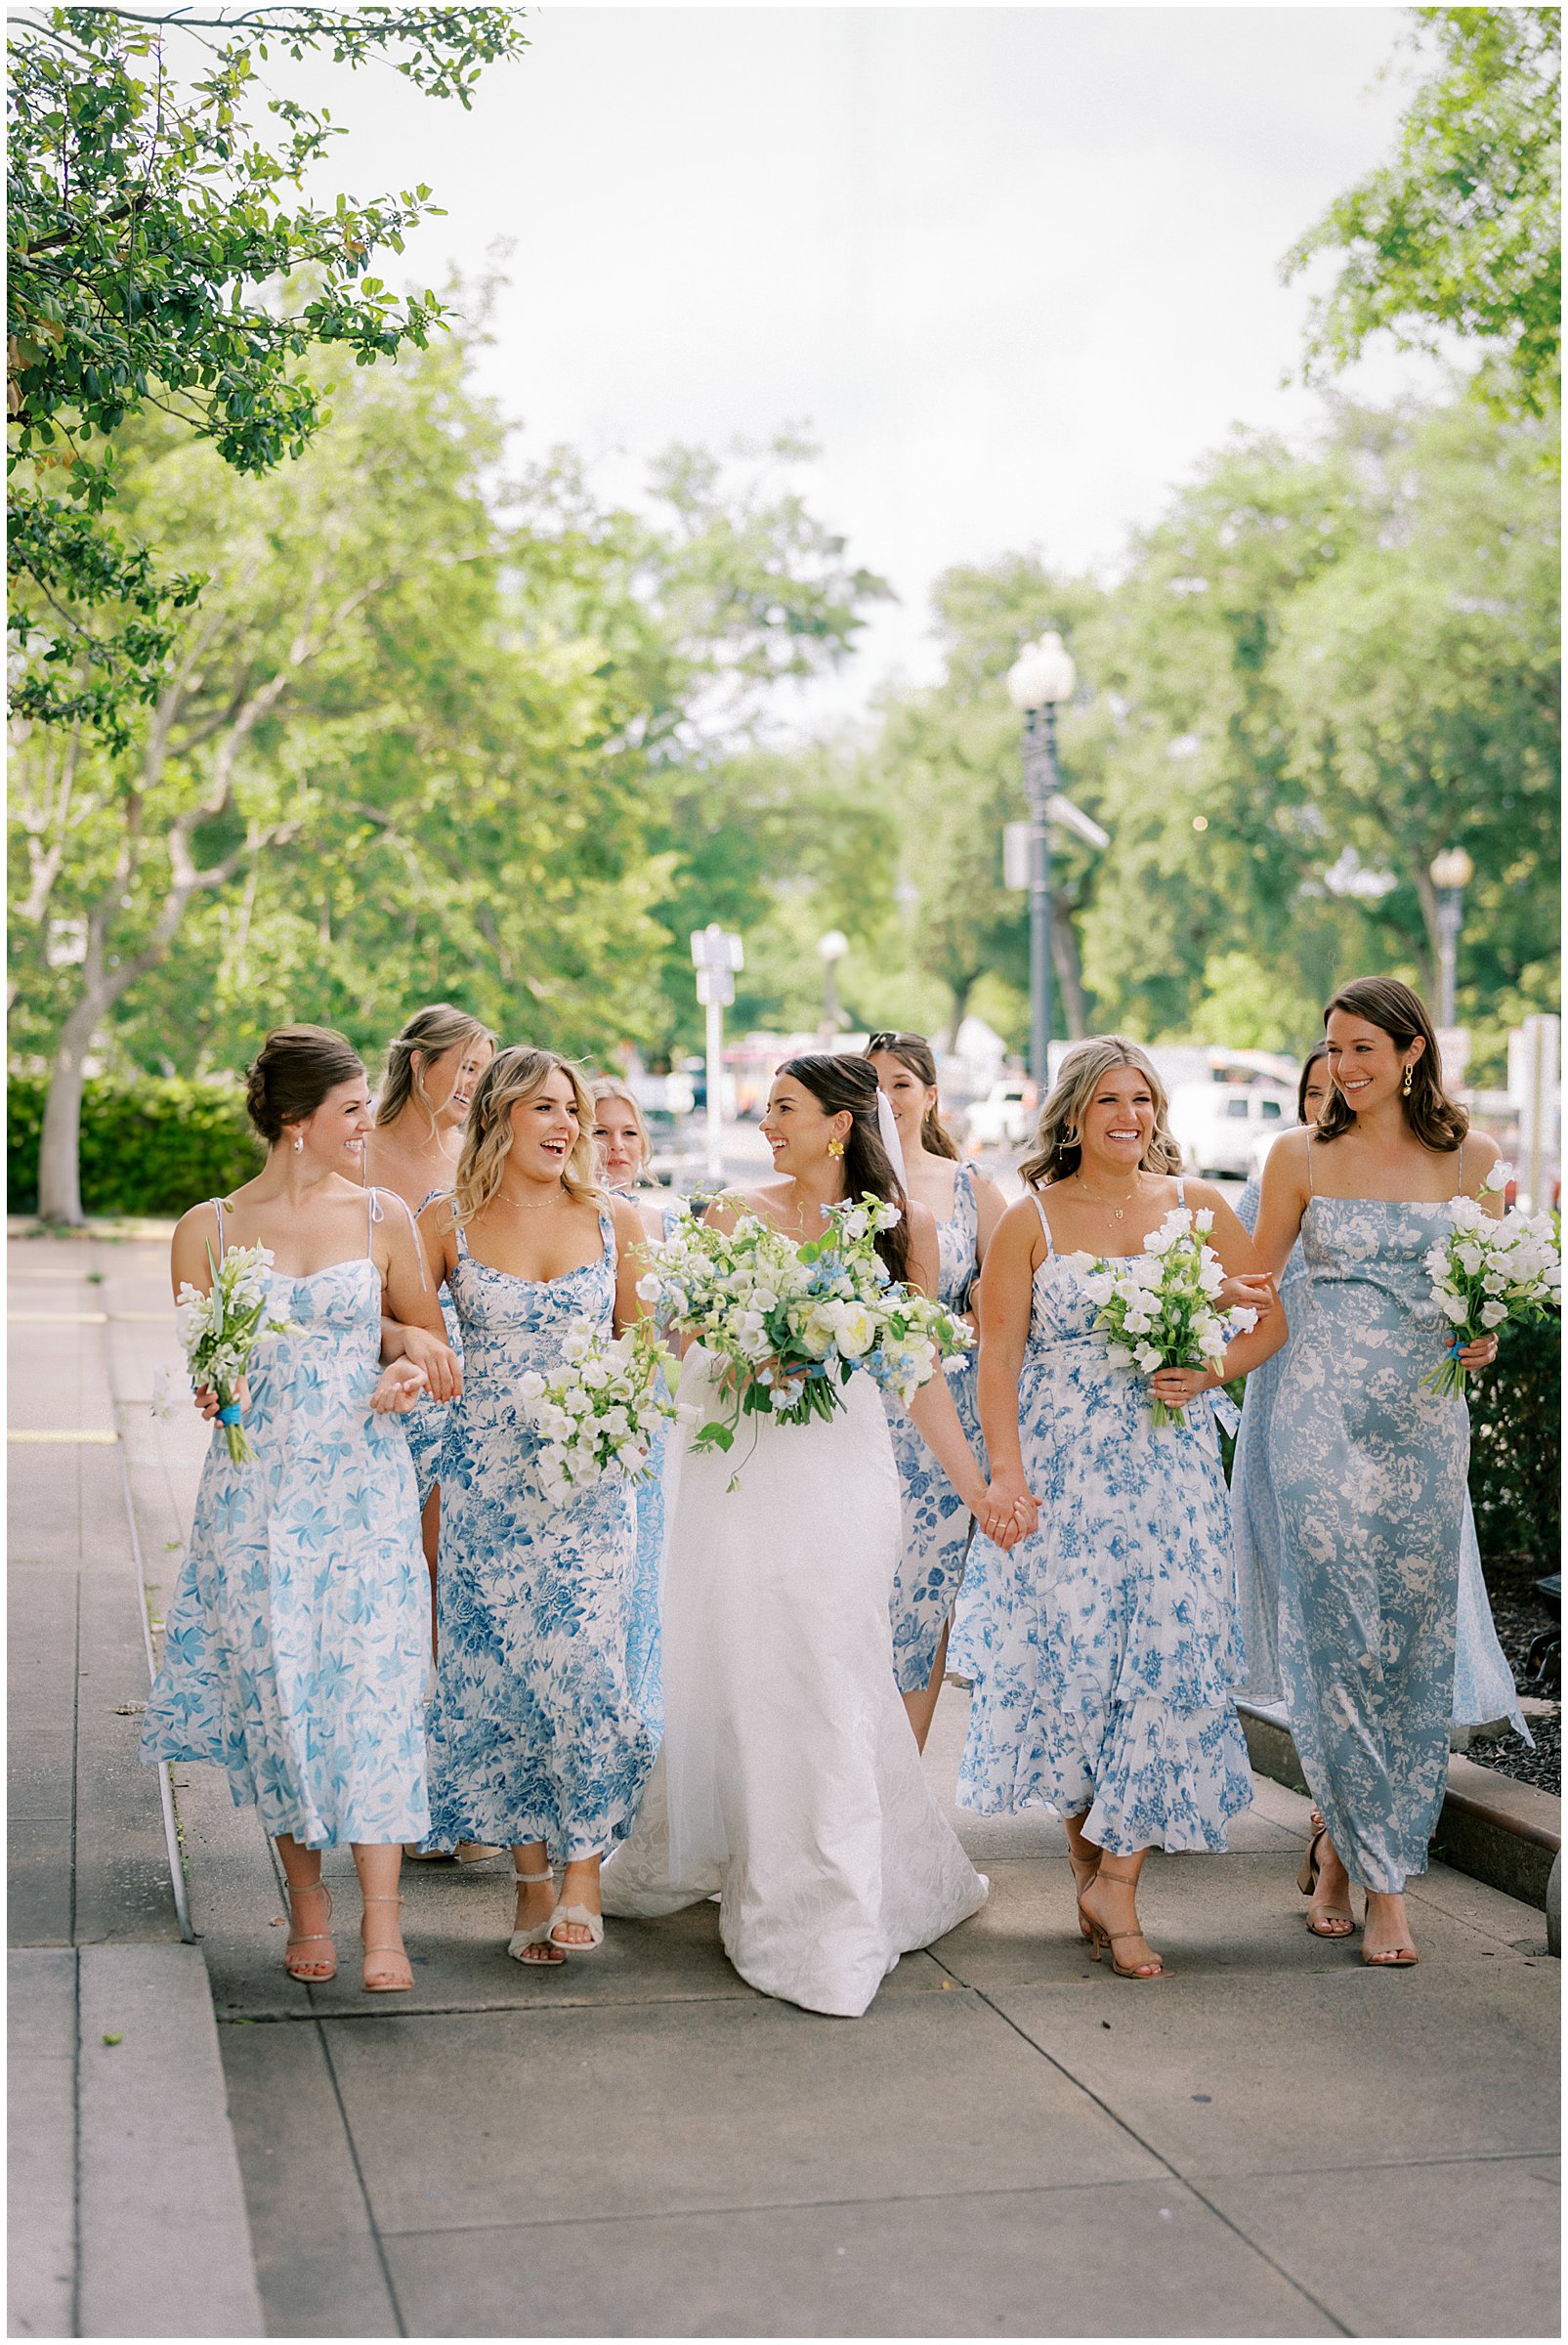 Blue and white floral print bridesmaid dresses